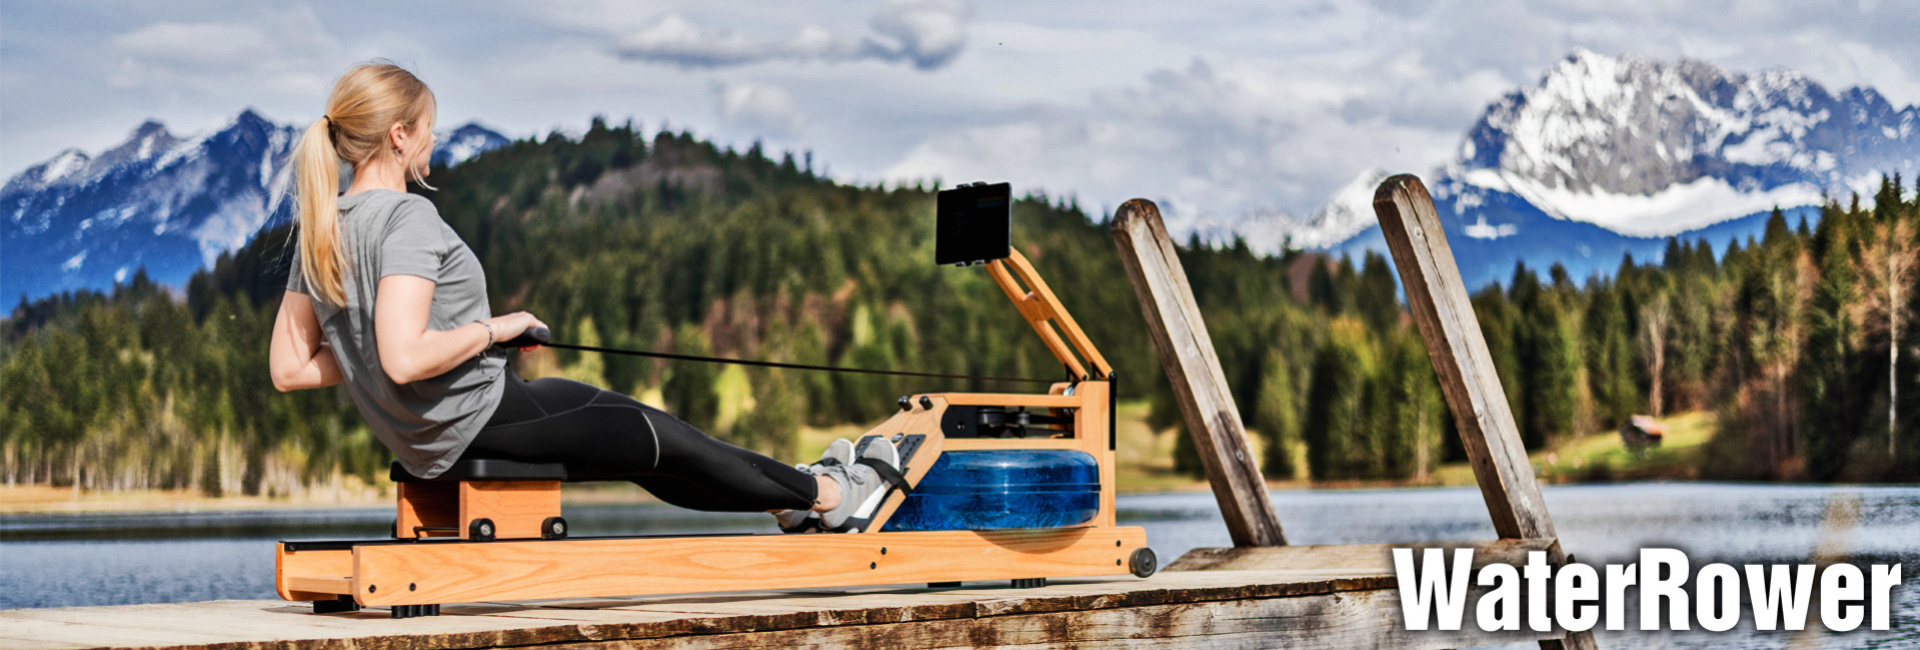 WaterRower - Training in harmony with nature!